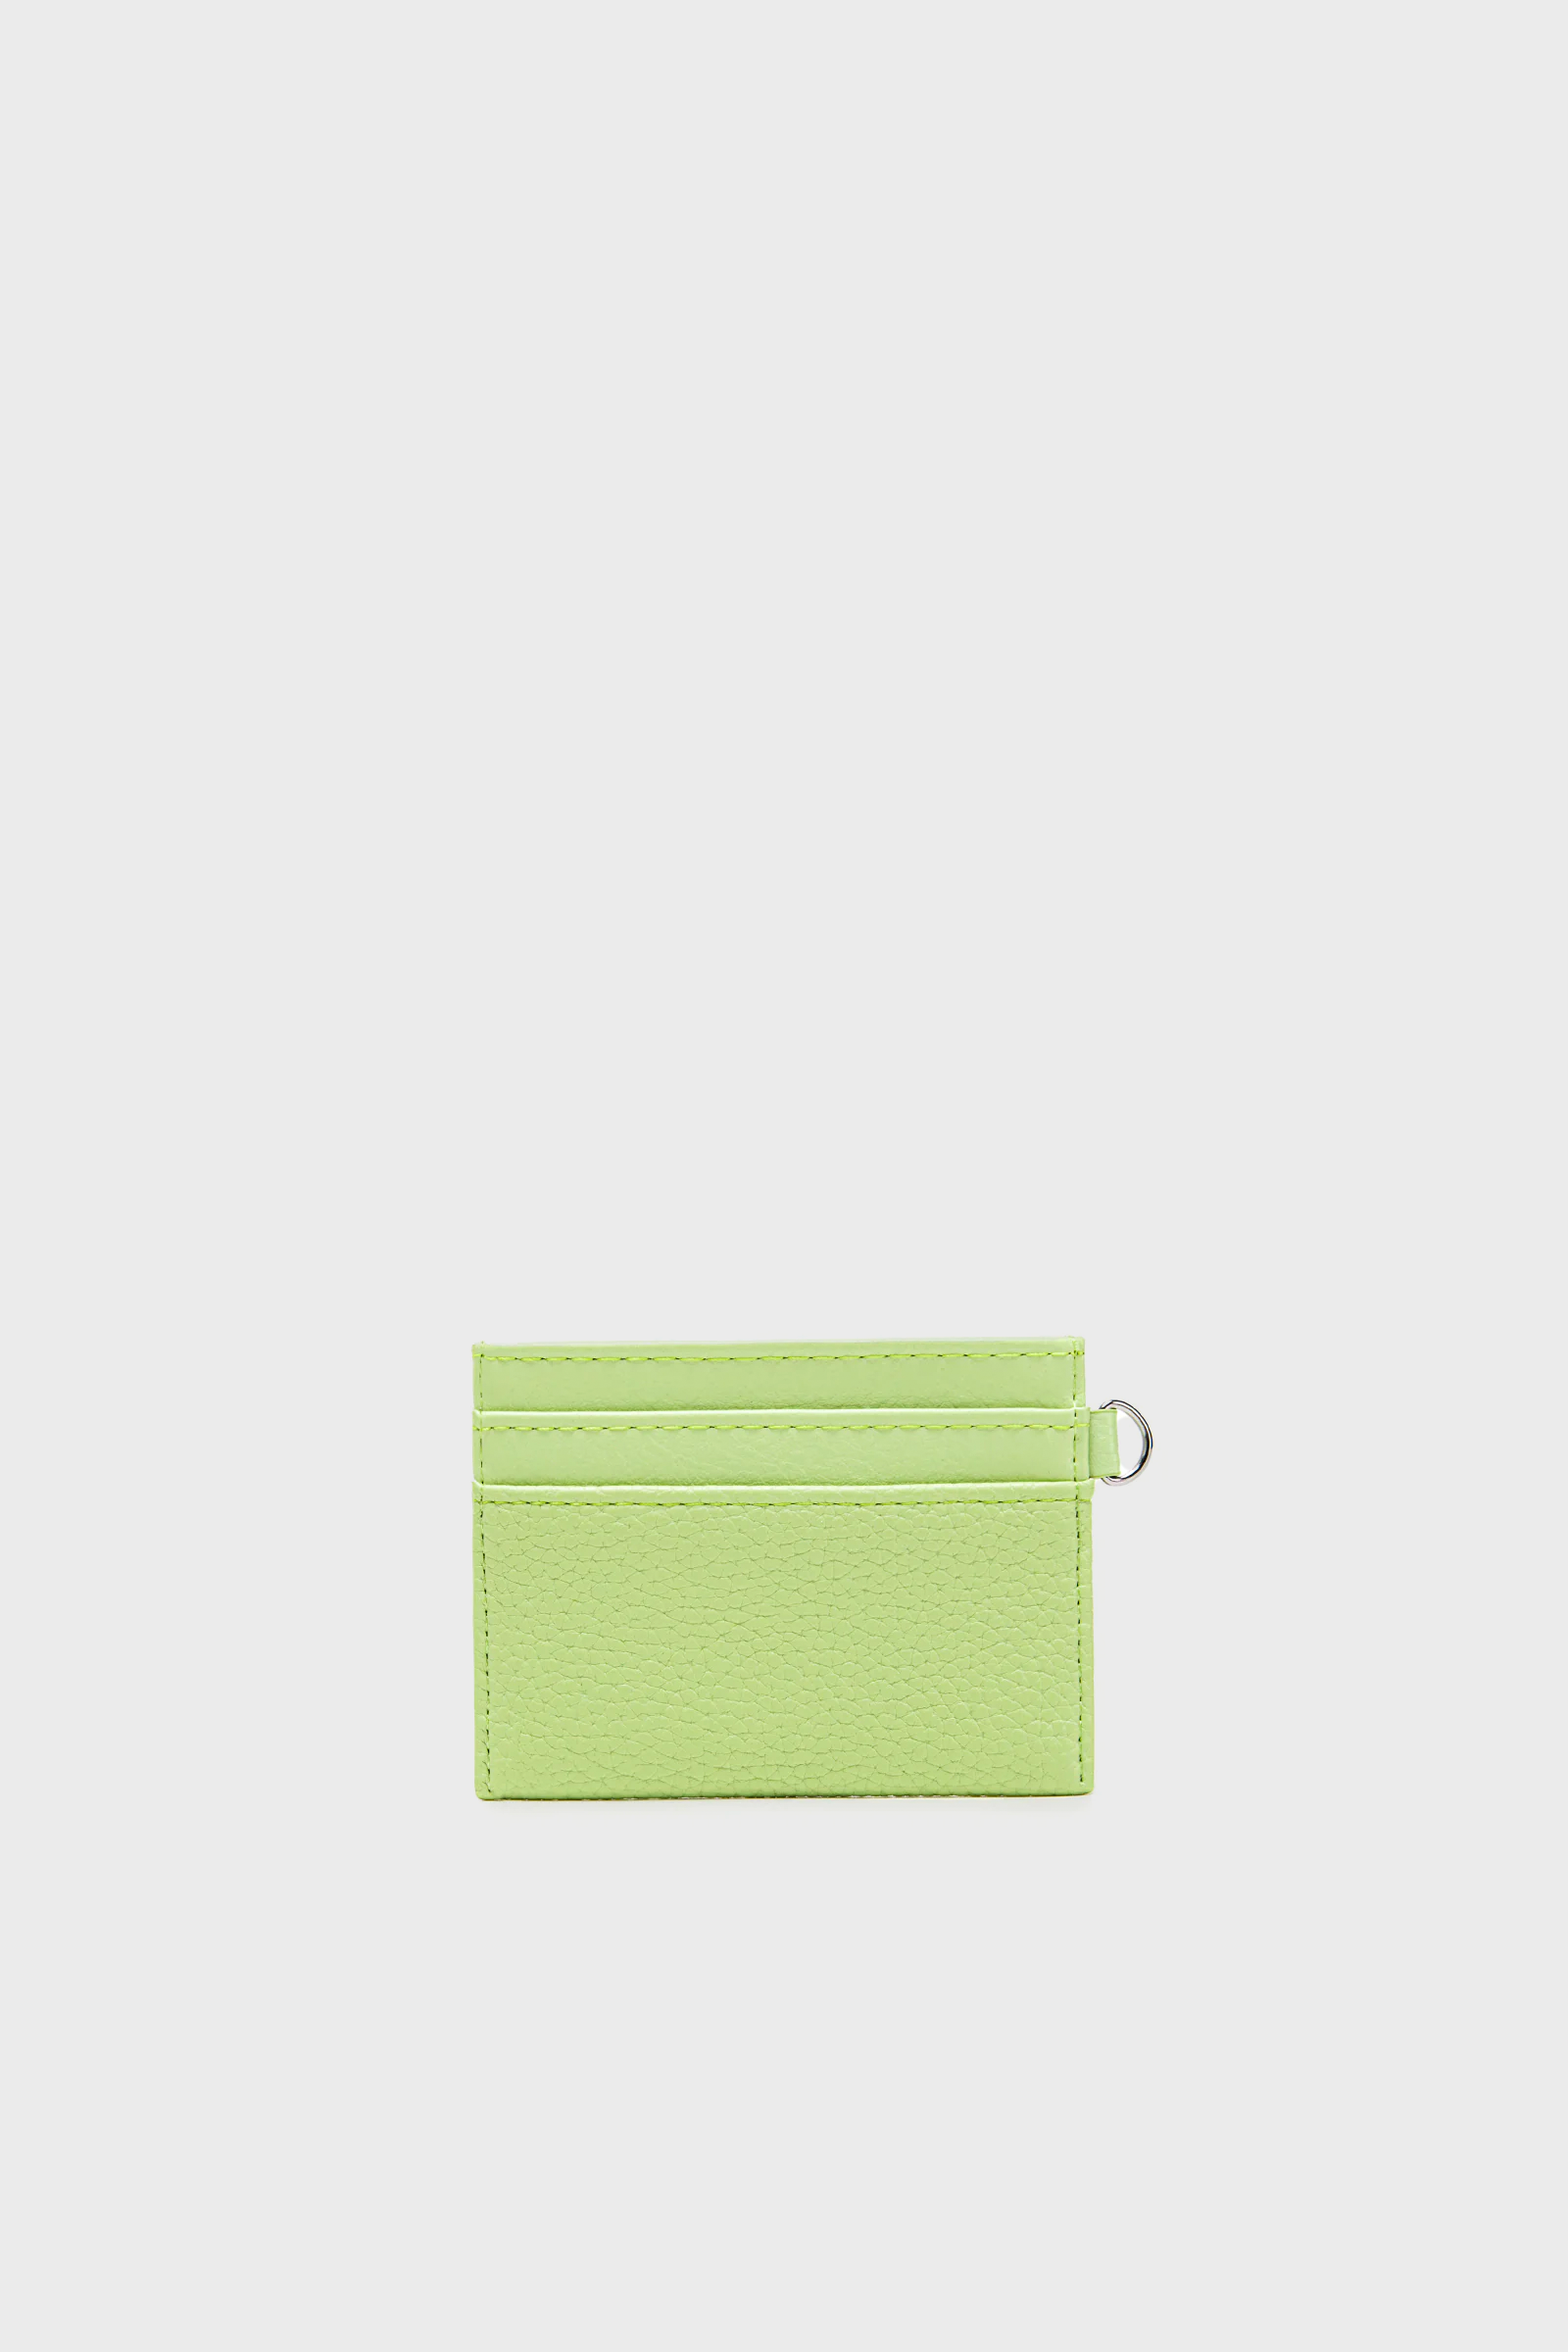 Pixie Mood Alex Cardholder in Lime Pebbled